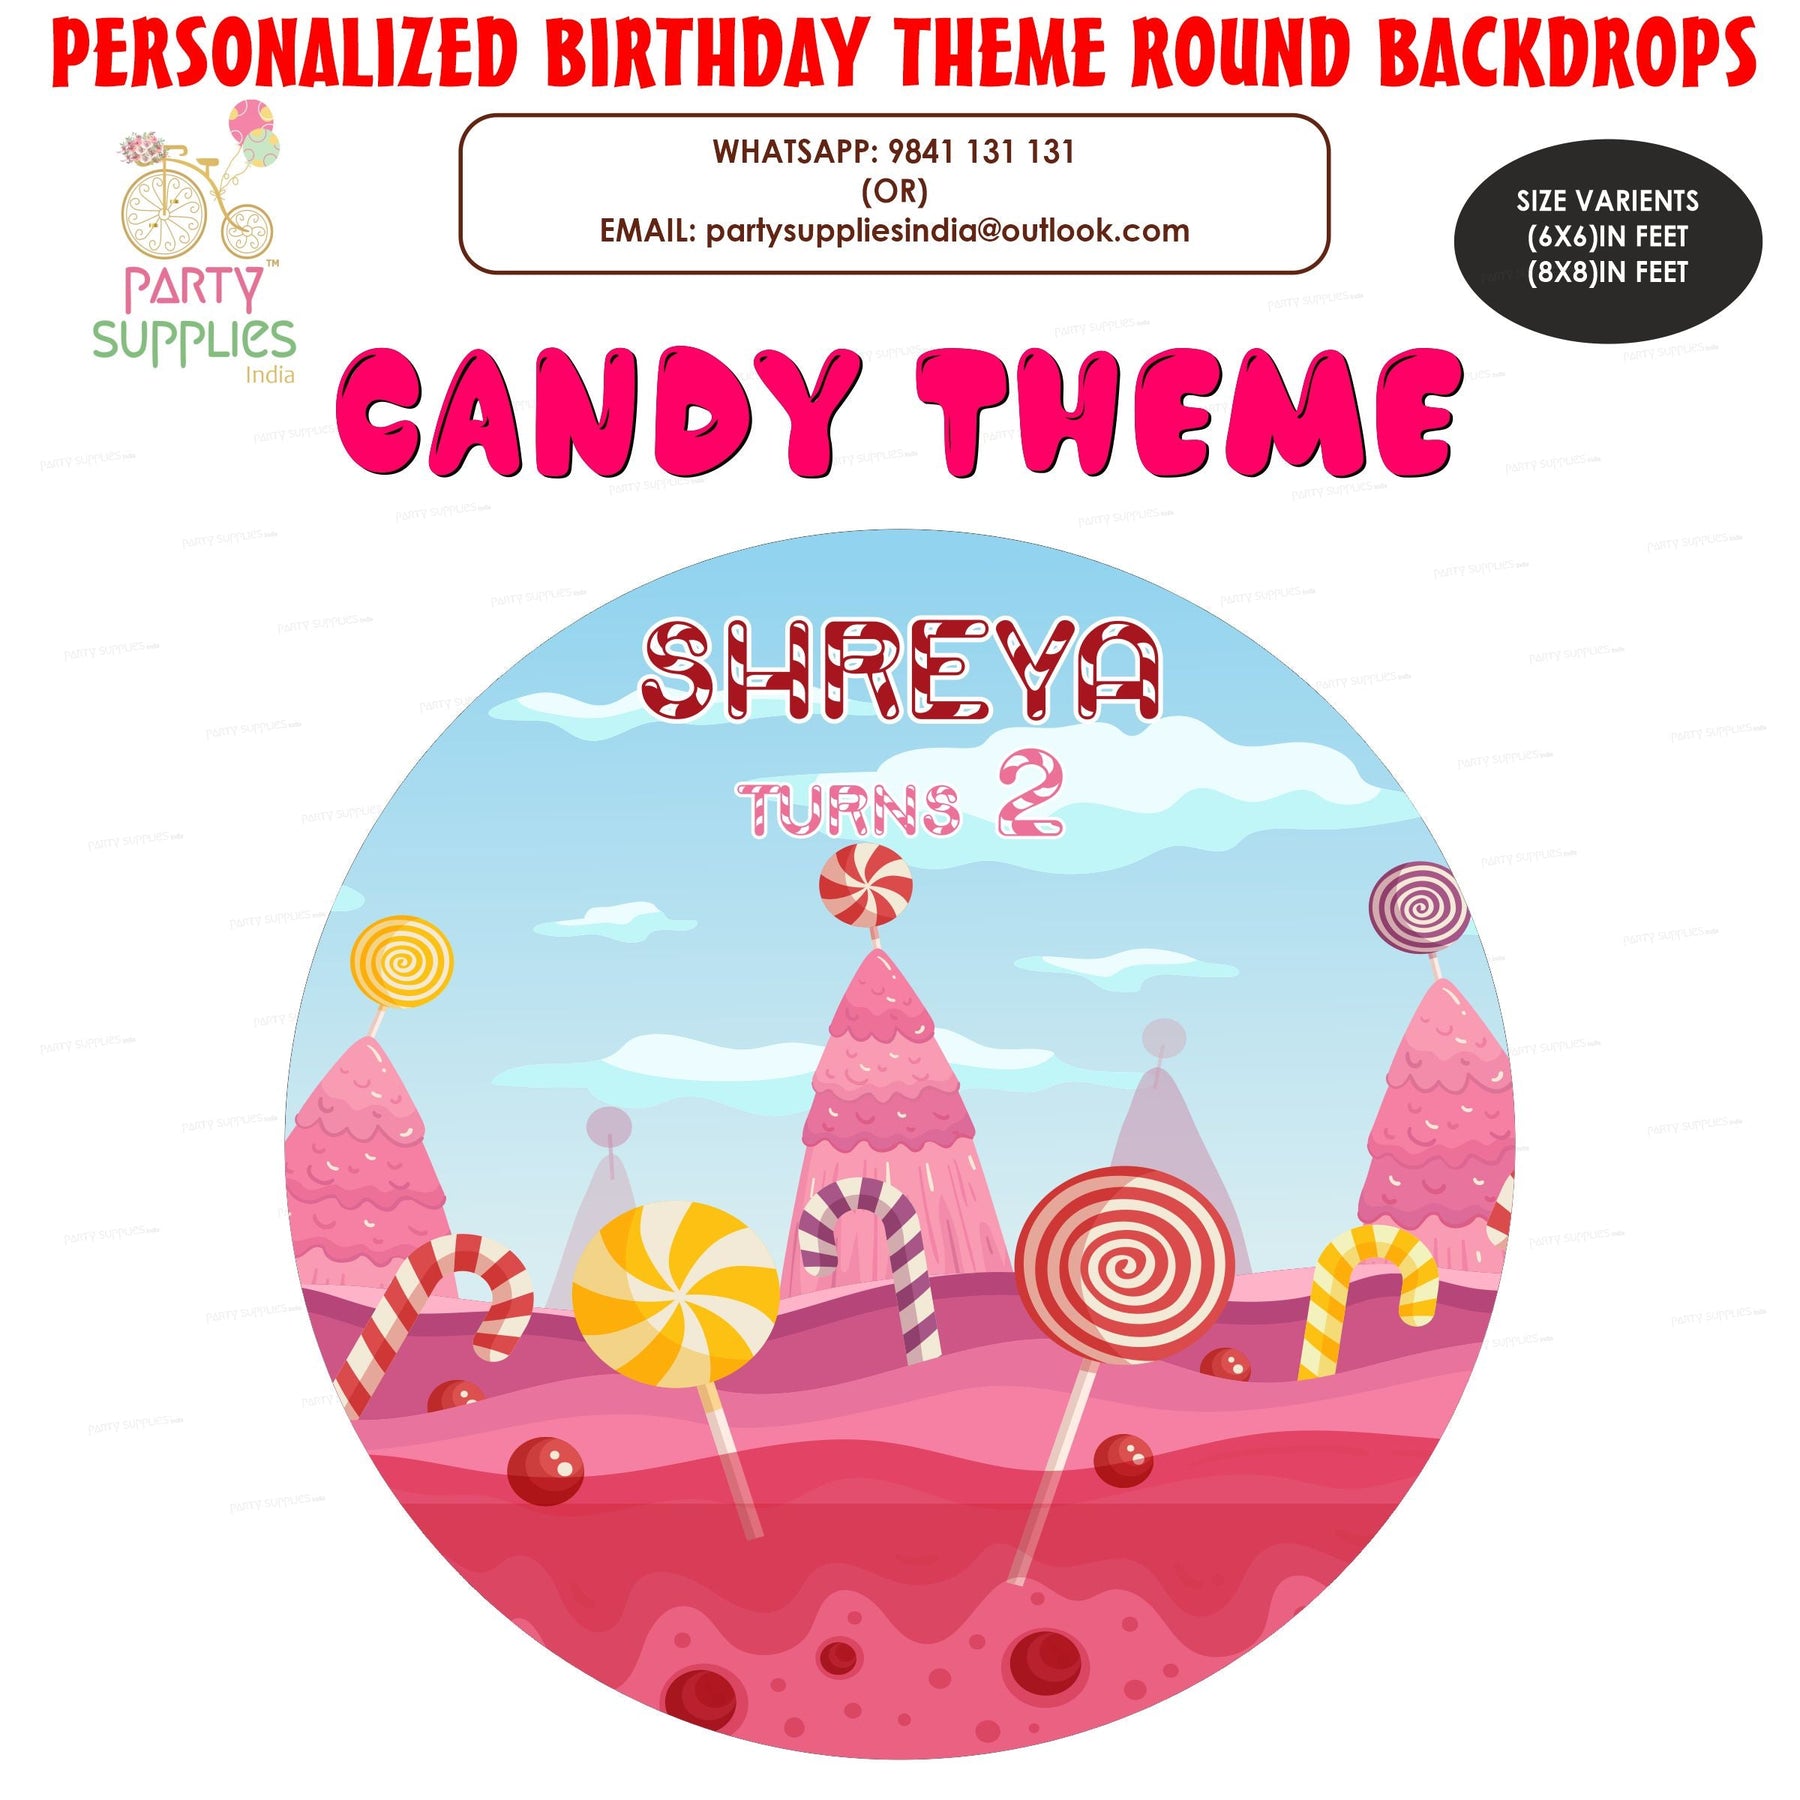 PSI Candy Hill Theme Round Backdrop